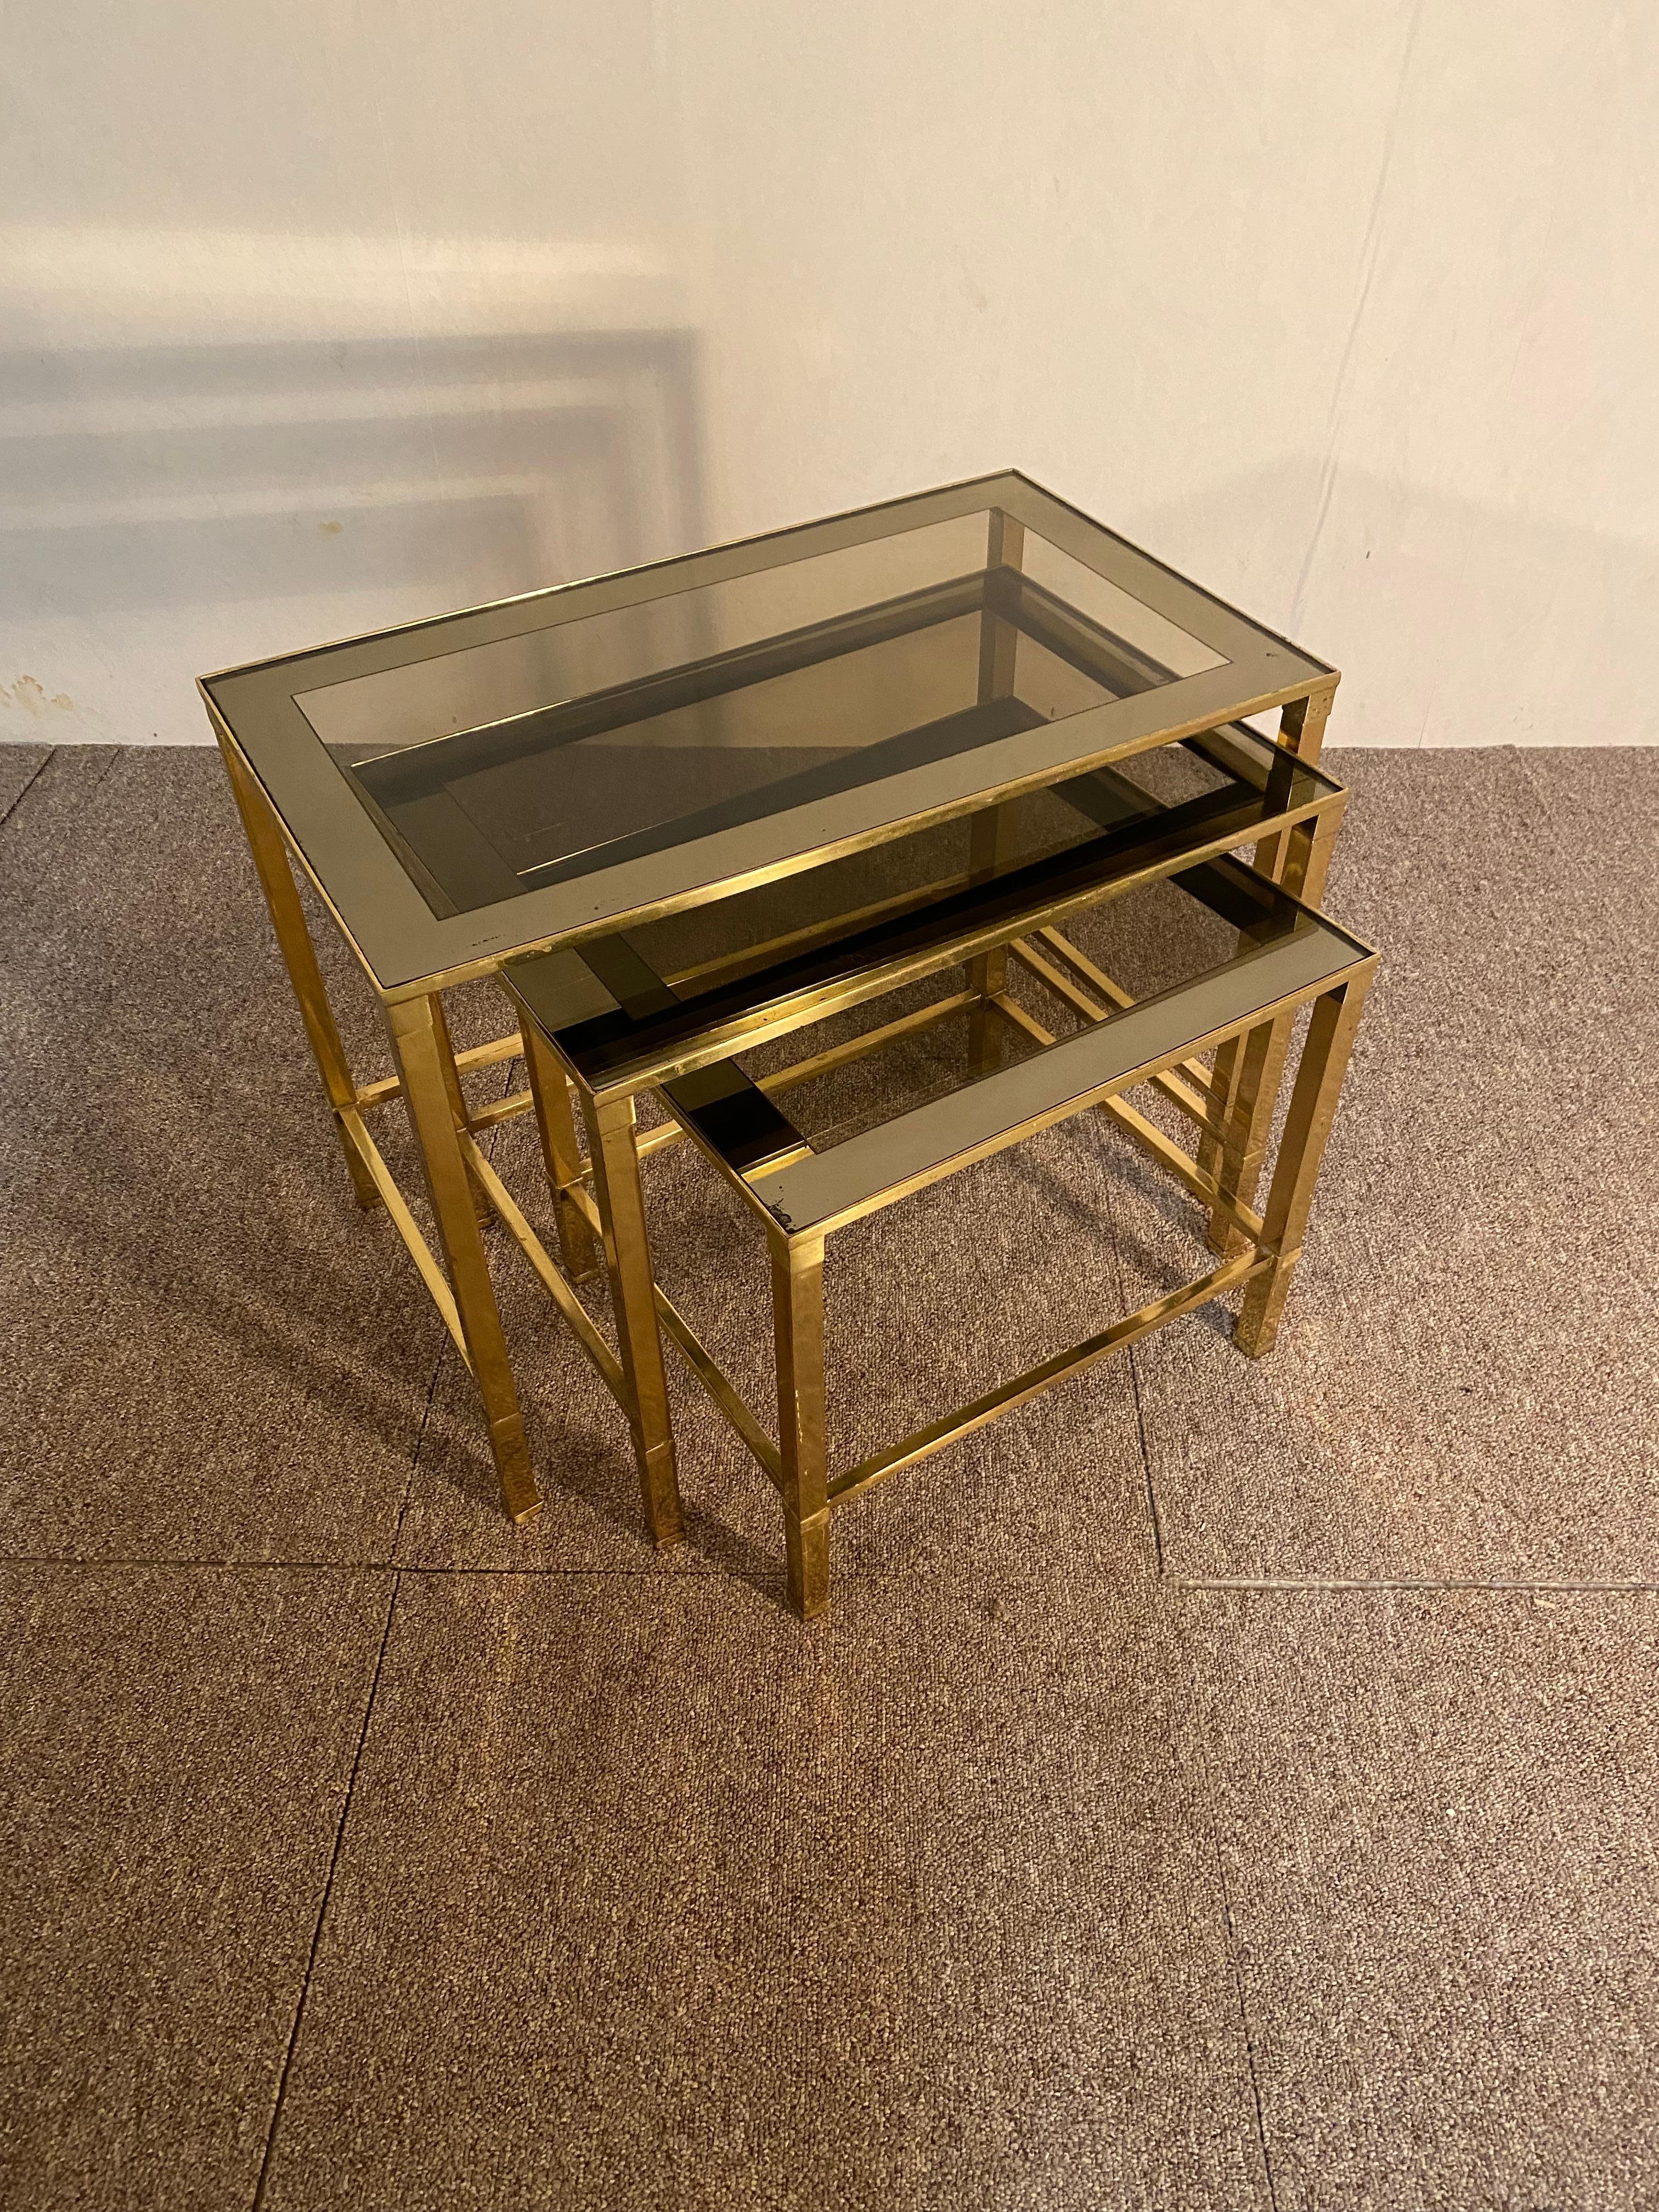 Series of three brass nesting tables. Smoked lenses. Italian work from the 70s. In good condition.